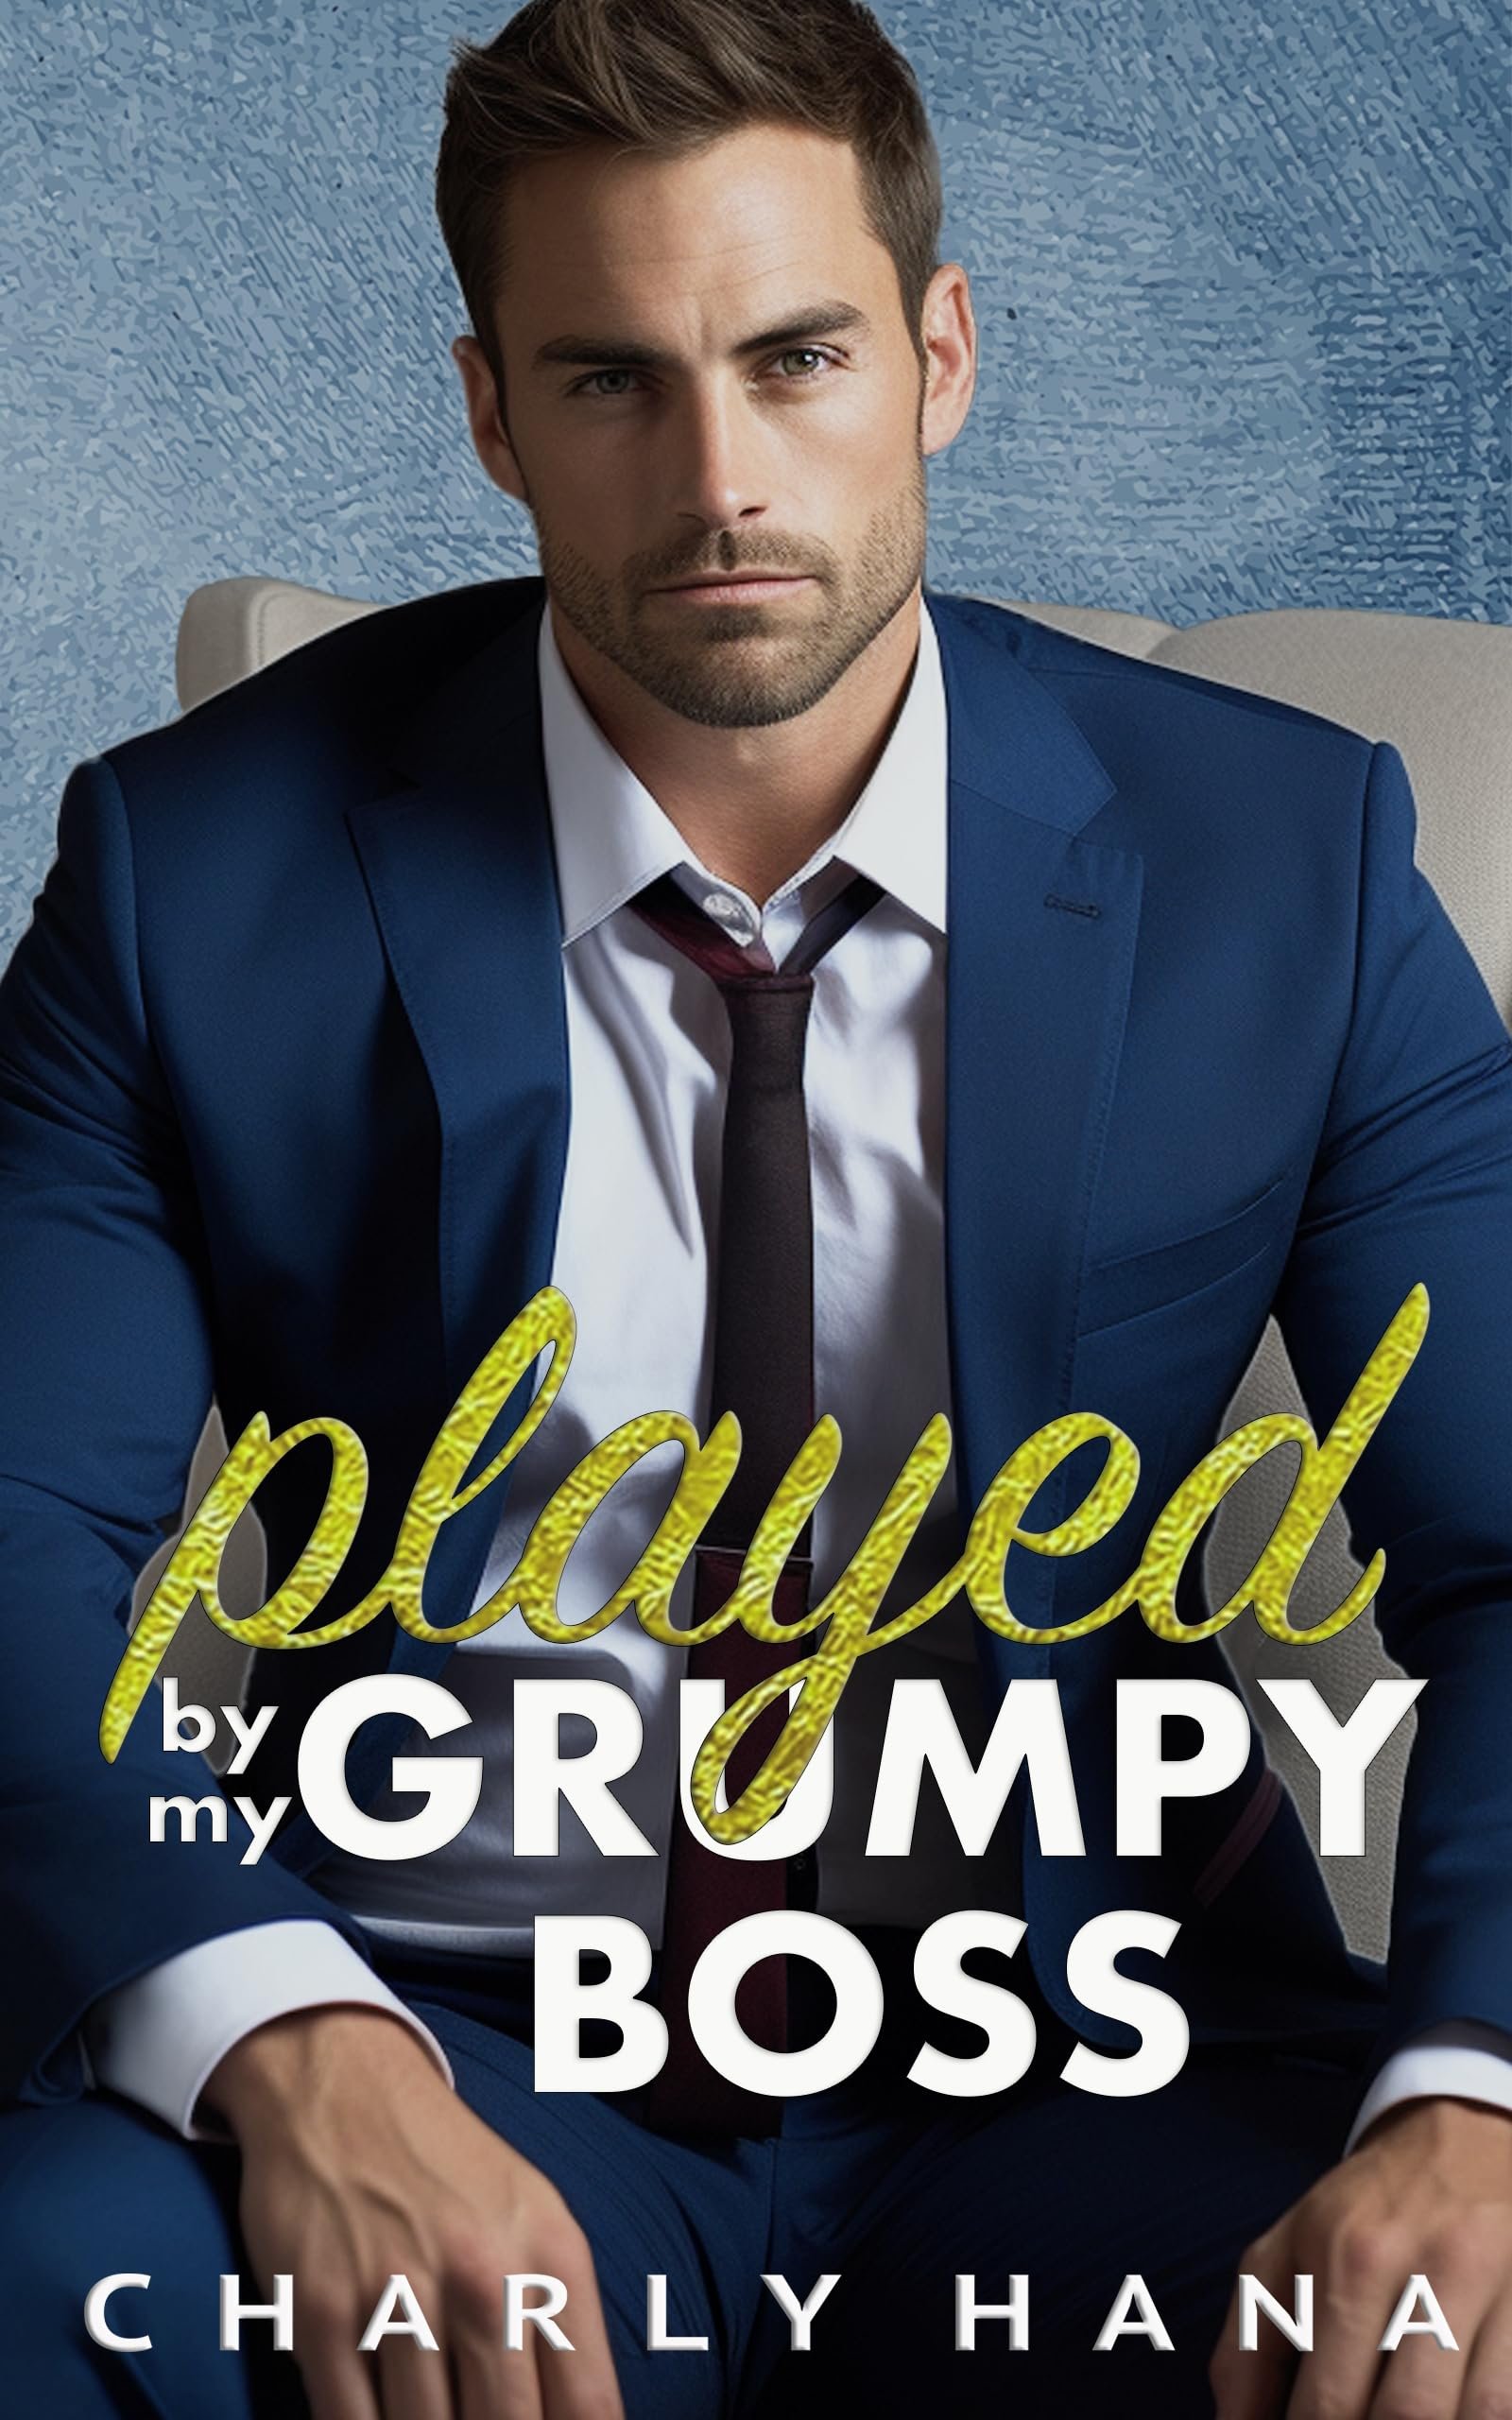 Played by my Grumpy Boss: Enemies to Lovers Age Gap Romance Cover